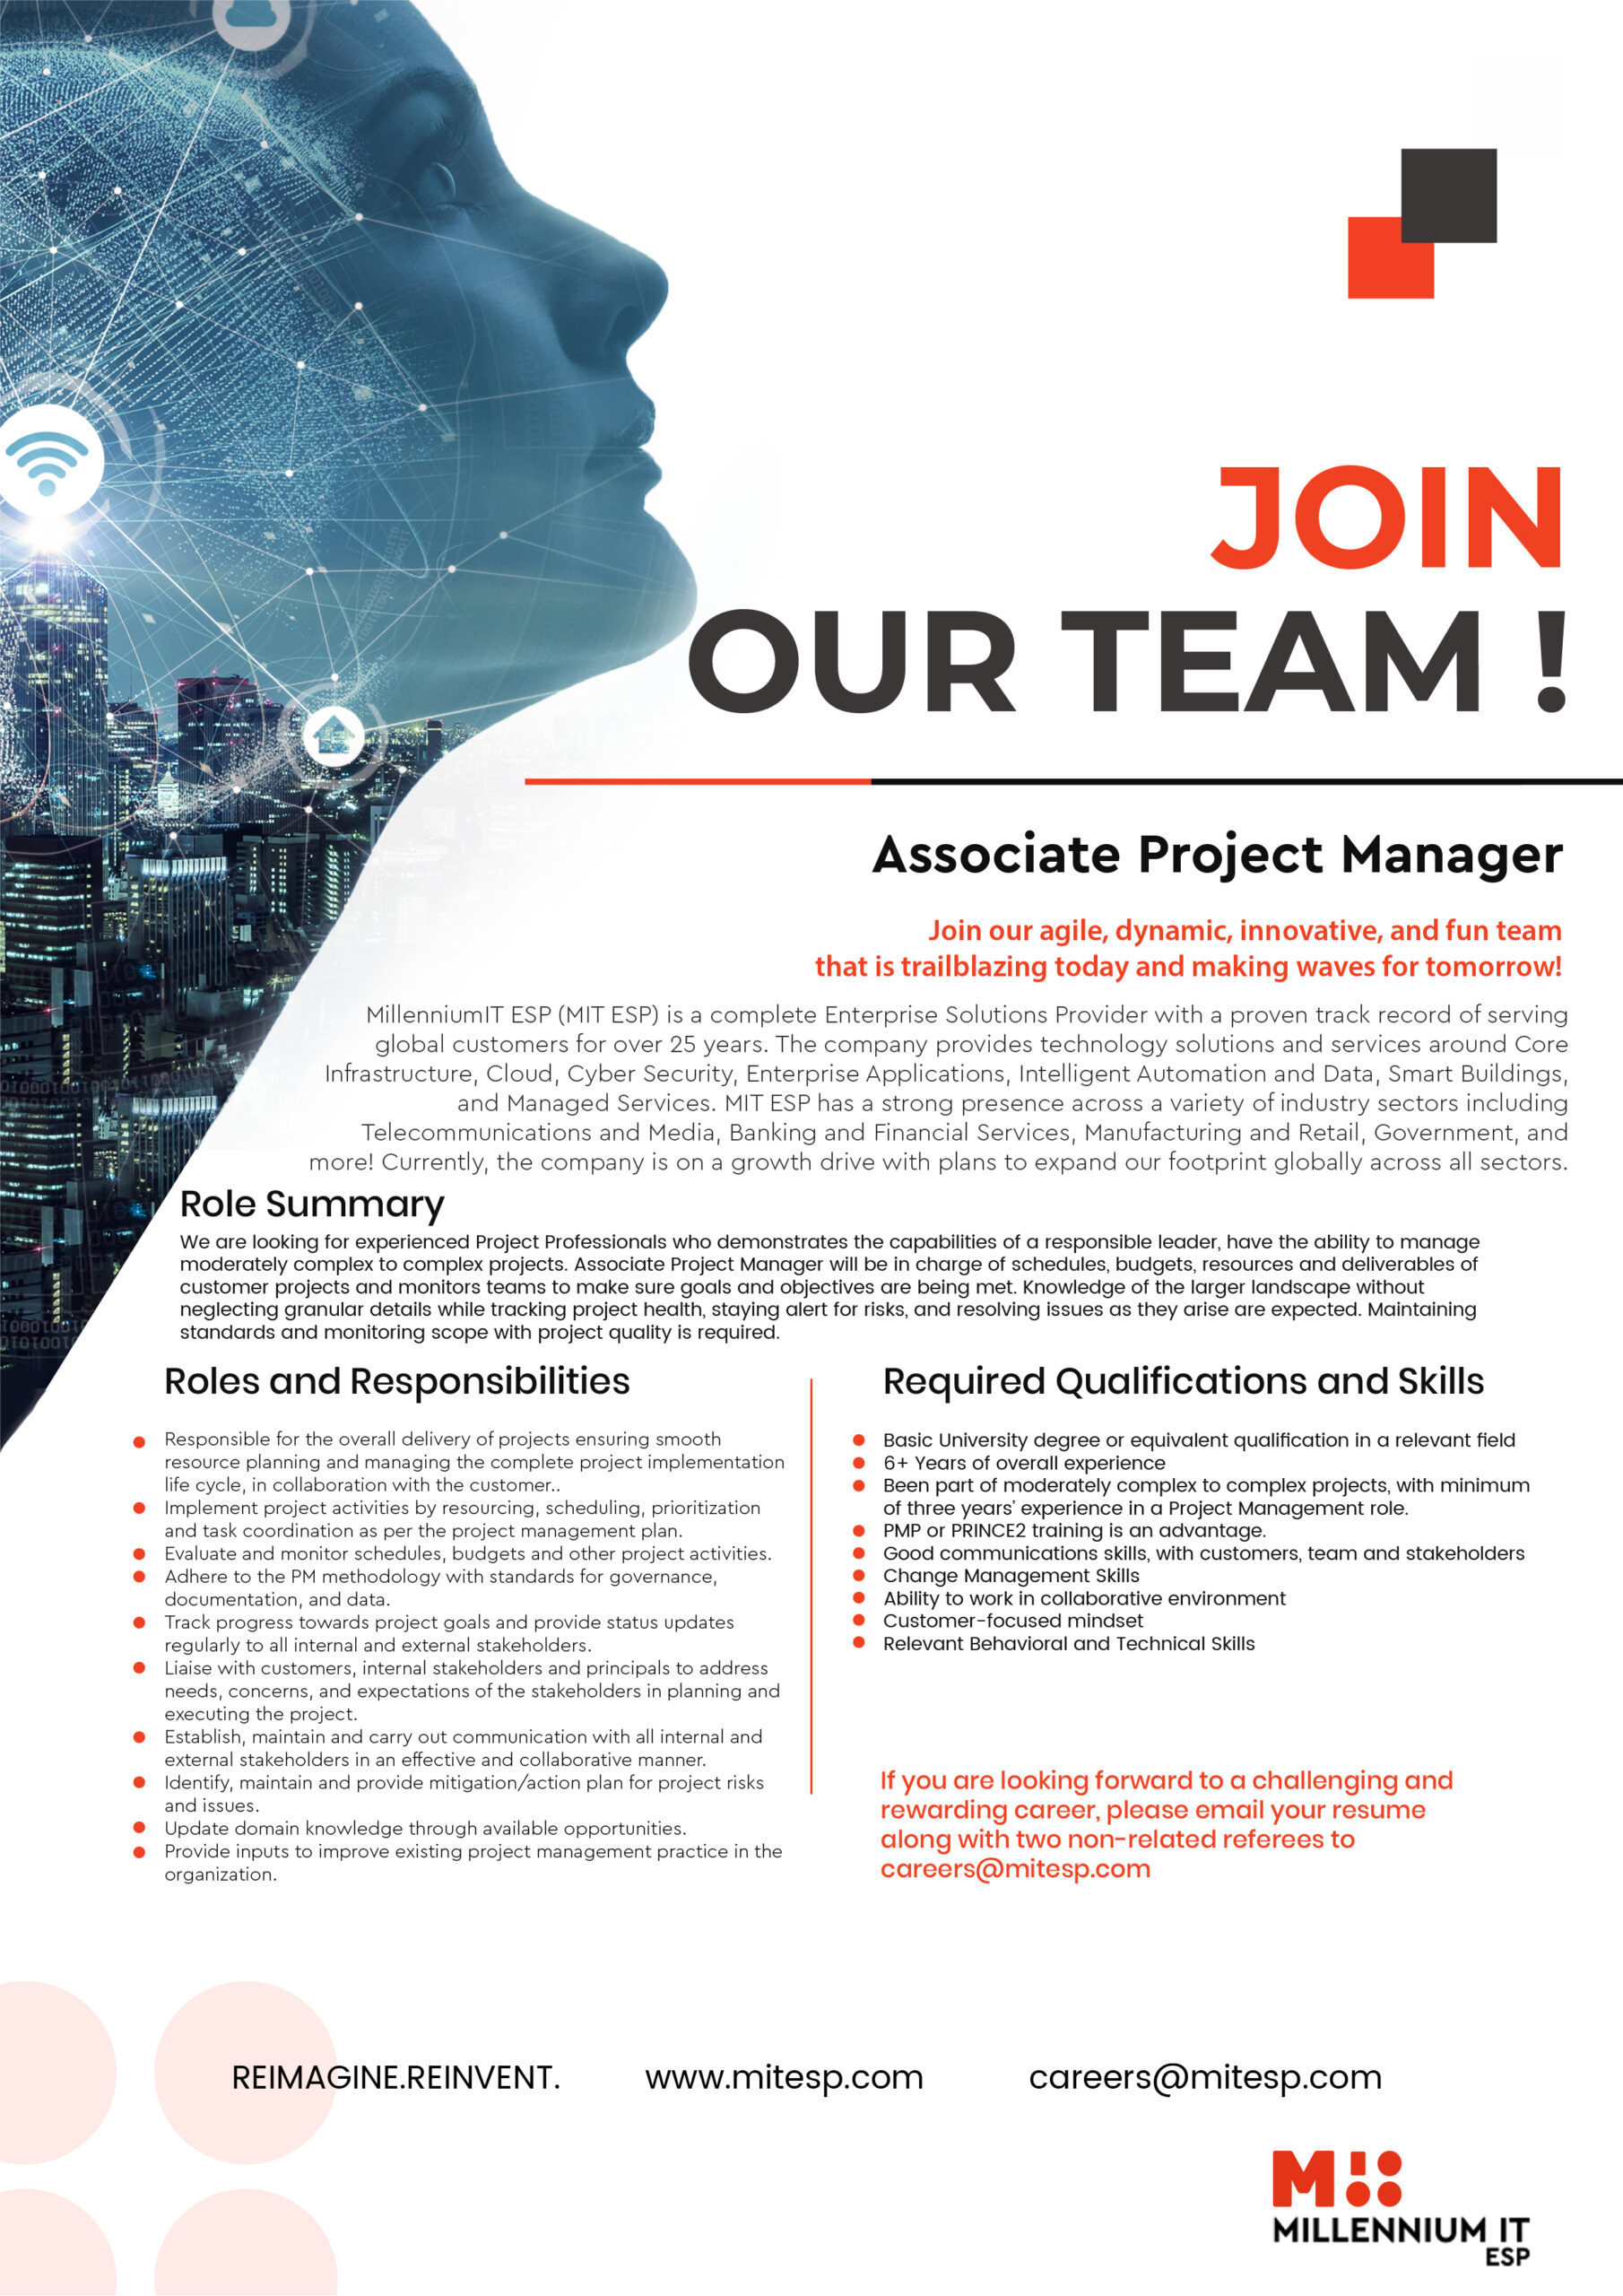 Associate Project Manager - JD Image